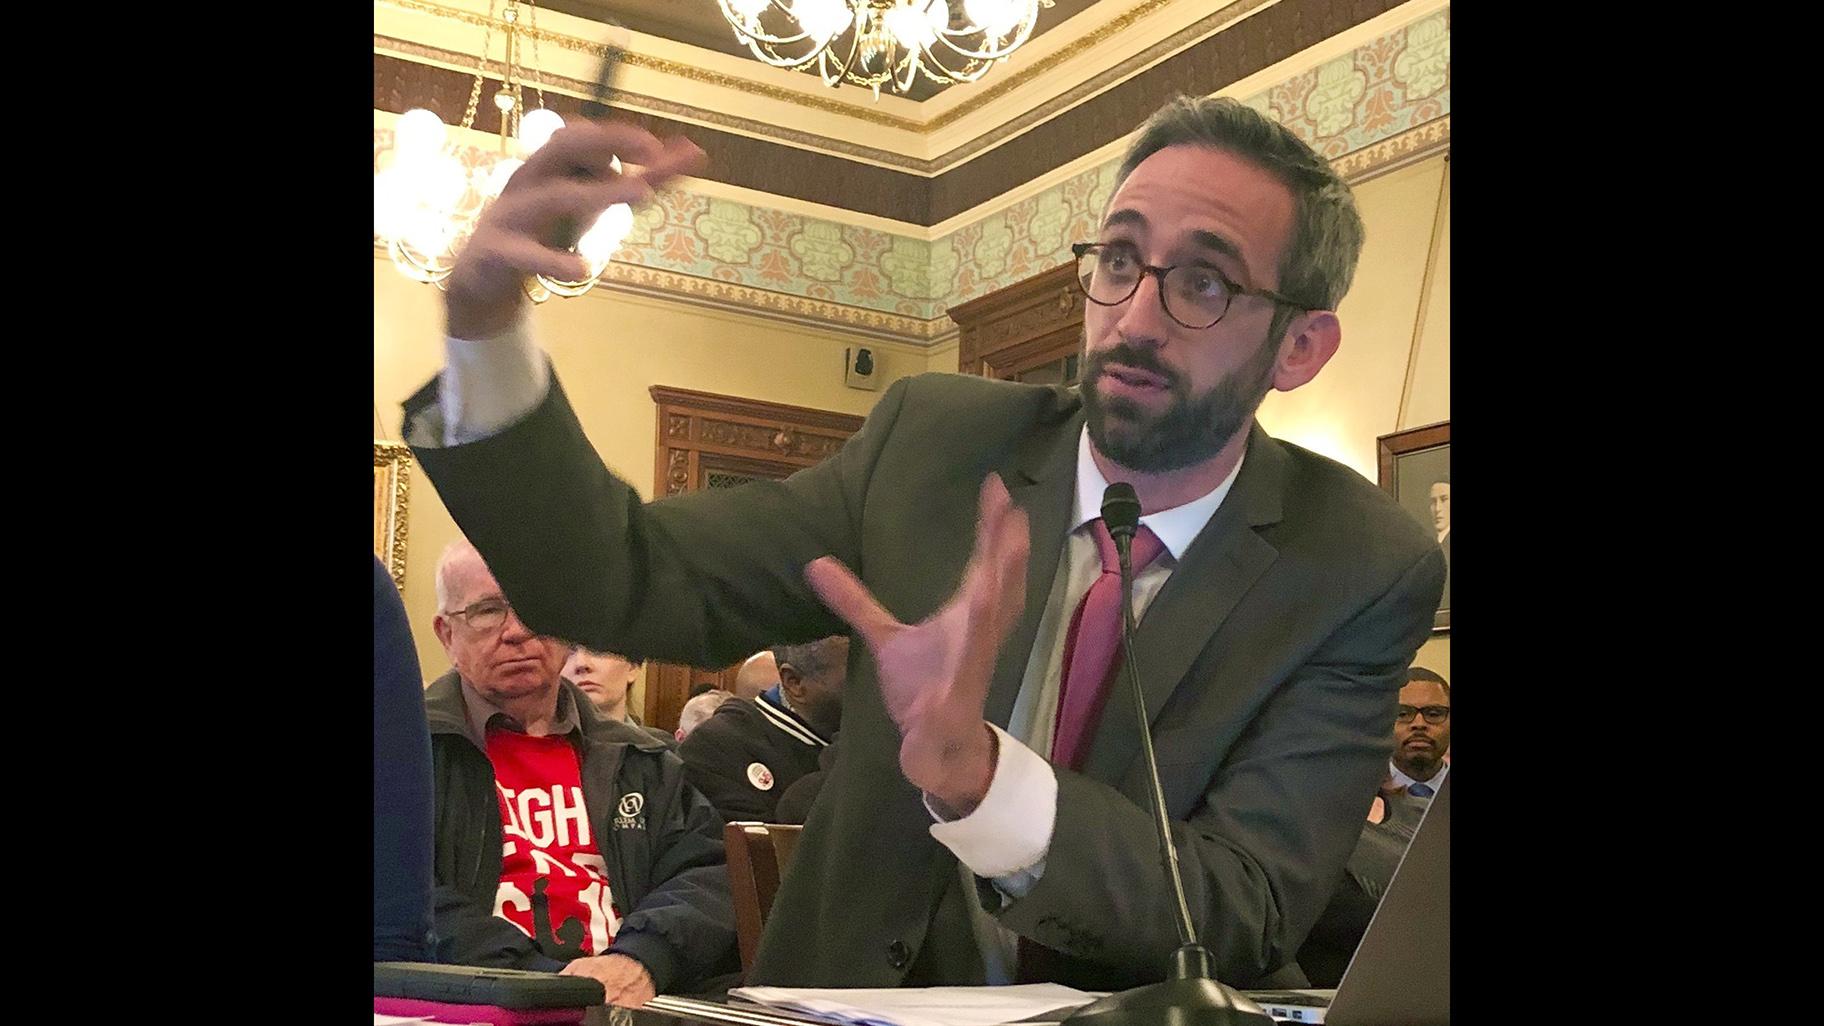 Illinois state Rep. Will Guzzardi, D-Chicago, testifies before the Labor and Commerce Committee on Wednesday, Feb. 13, 2019 on his proposal to increase the minimum wage to $15 by 2025. (AP Photo / John O’Connor)